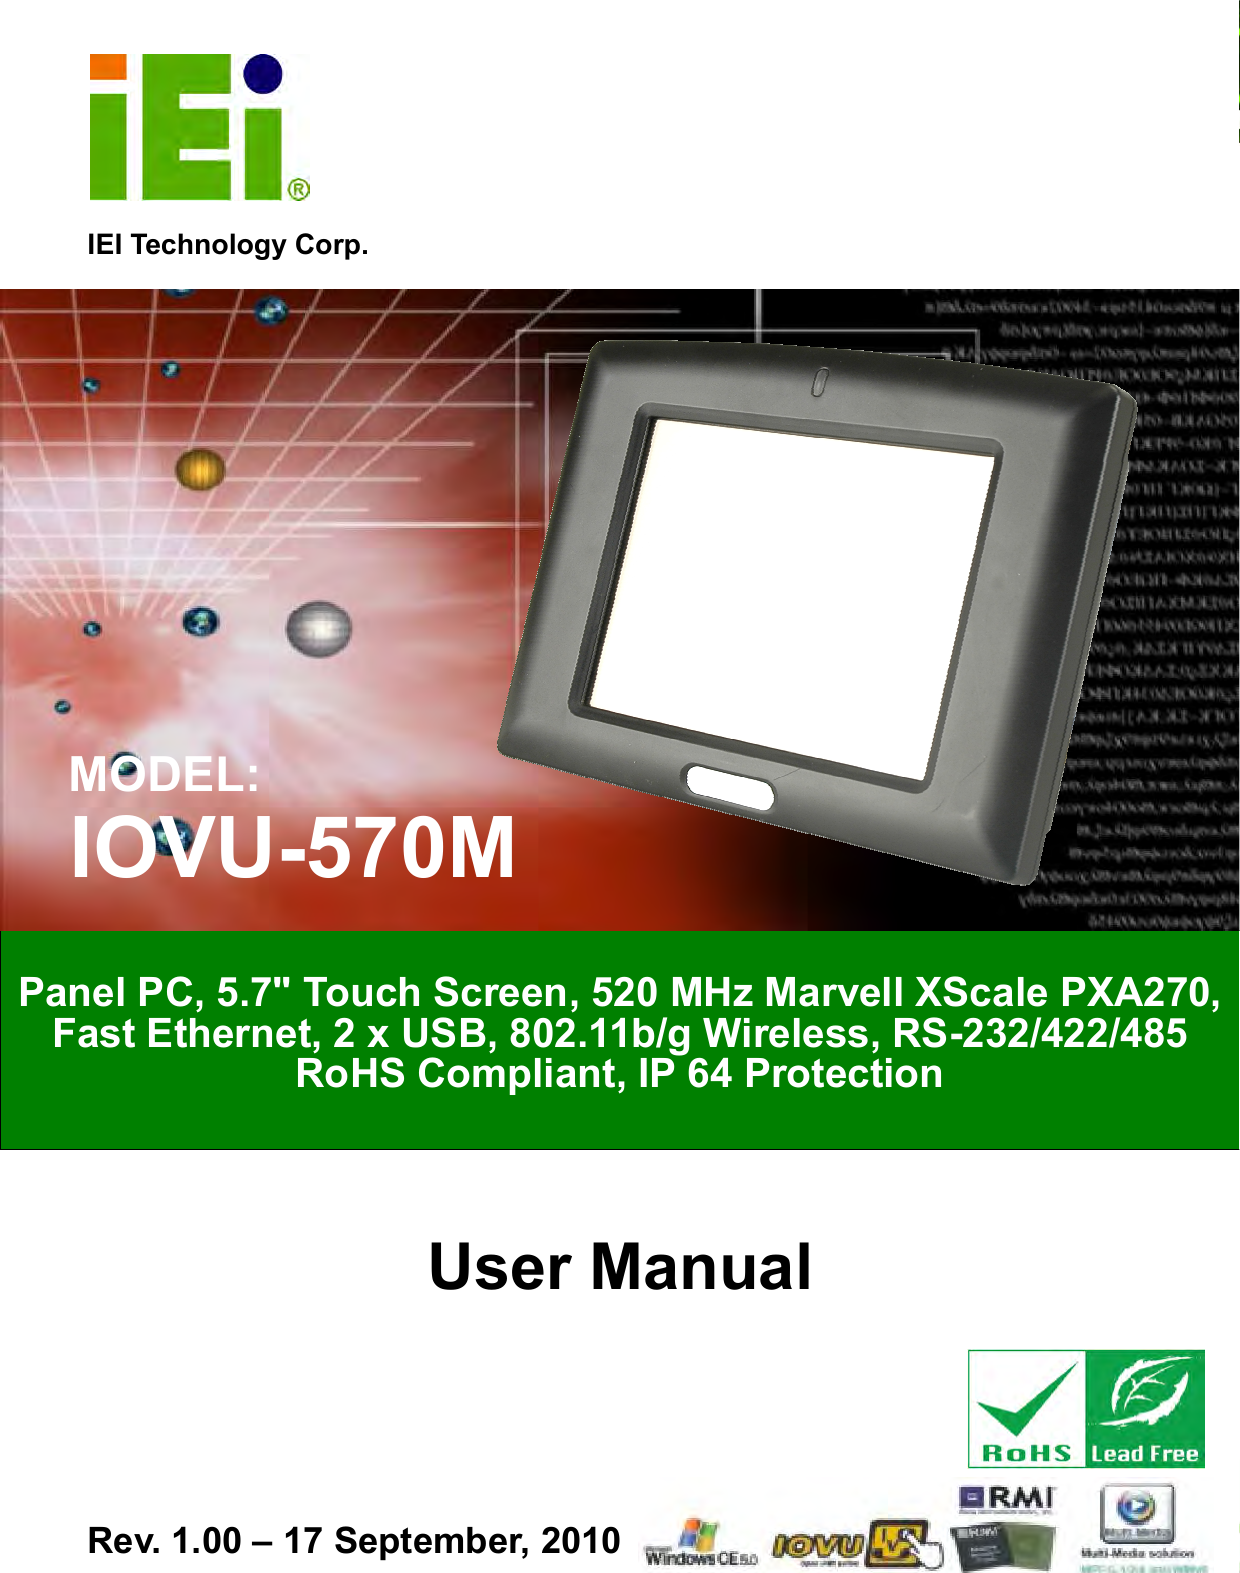   IOVU-570M Panel PC Page i IEI Technology Corp. User Manual  MODEL: IOVU-570M Panel PC, 5.7&quot; Touch Screen, 520 MHz Marvell XScale PXA270, Fast Ethernet, 2 x USB, 802.11b/g Wireless, RS-232/422/485 RoHS Compliant, IP 64 Protection Rev. 1.00 – 17 September, 2010 